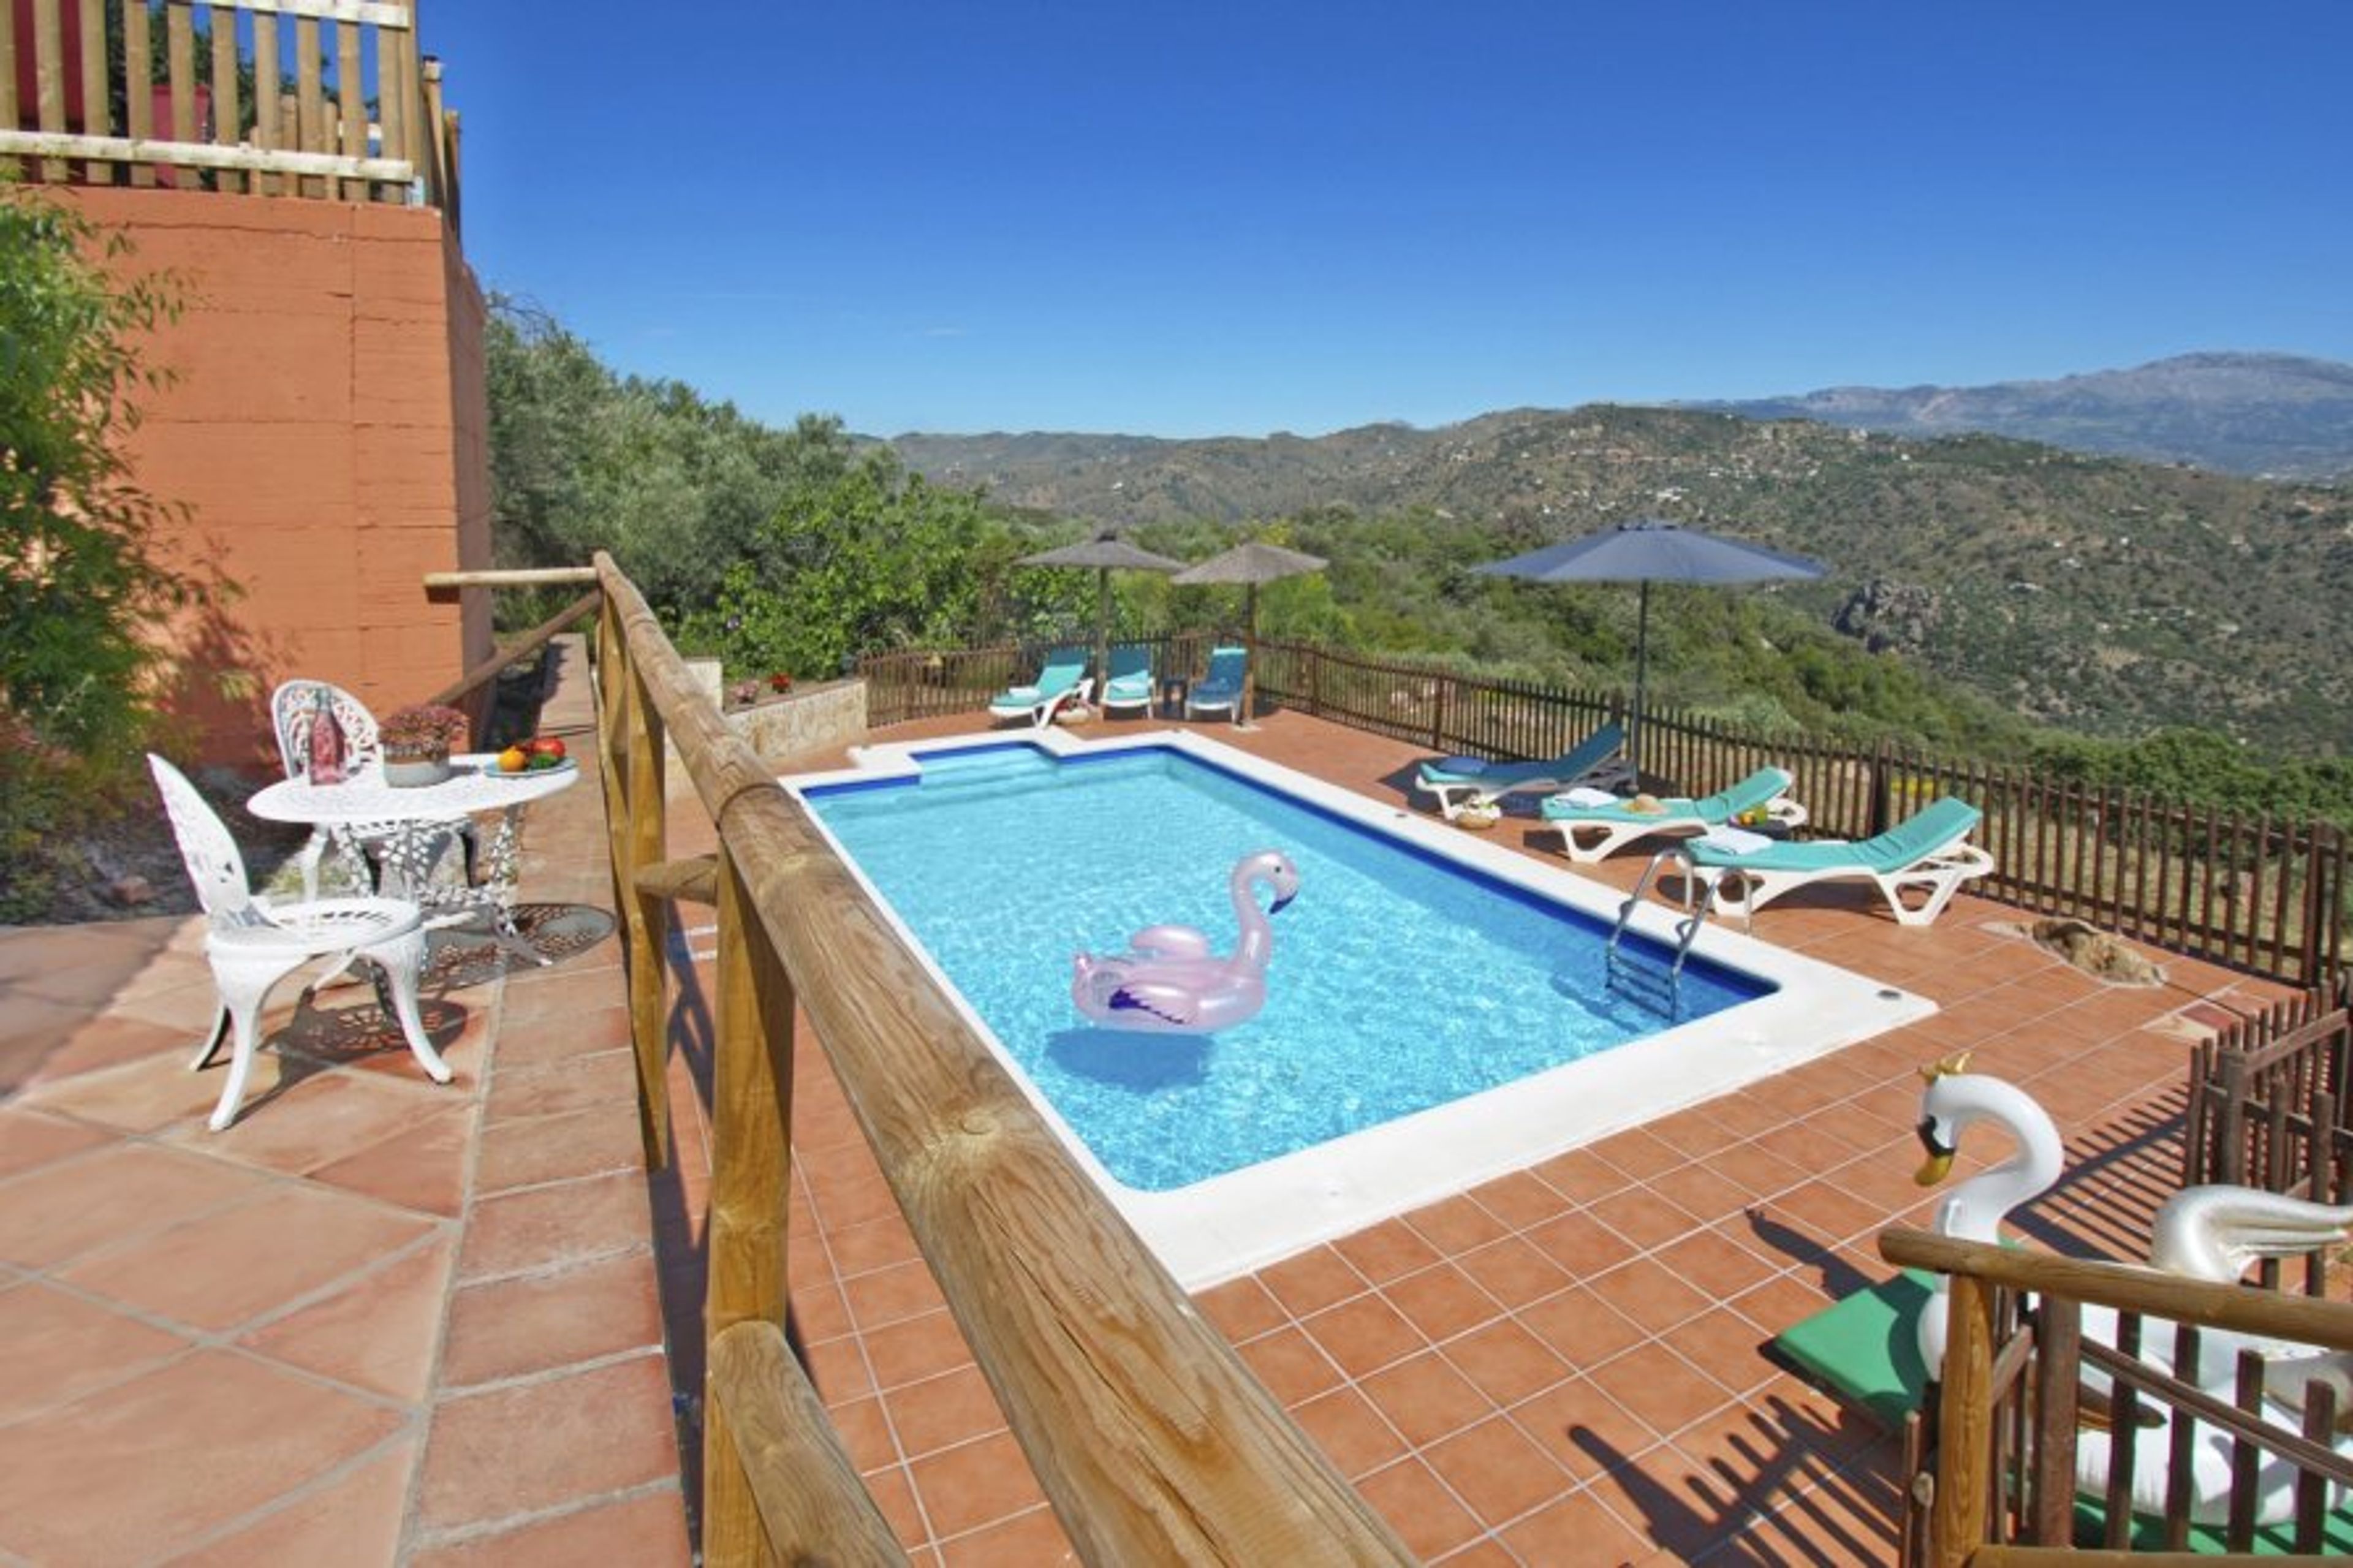 8m x 4m swimming fun with wide views over the beautiful sierras. 